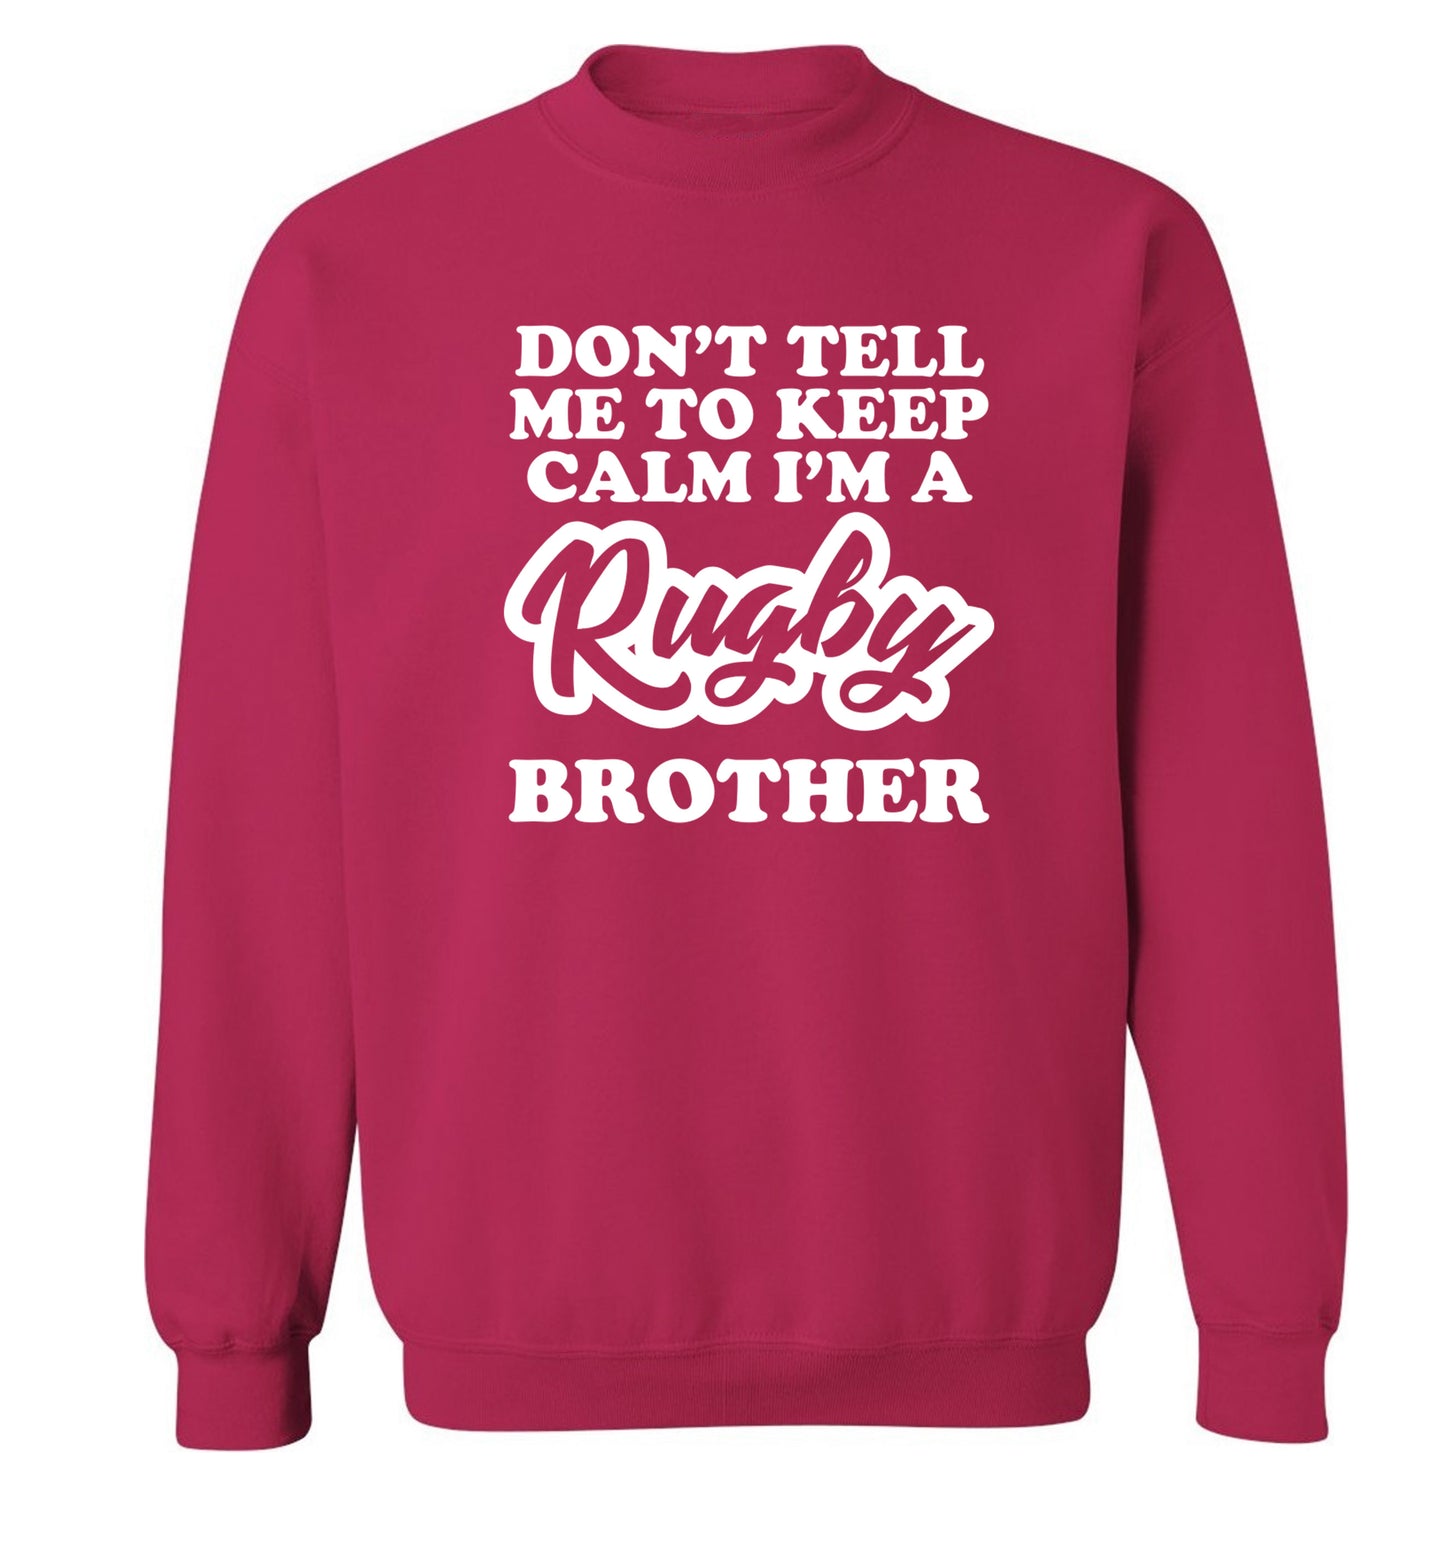 Don't tell me keep calm I'm a rugby brother Adult's unisex pink Sweater 2XL